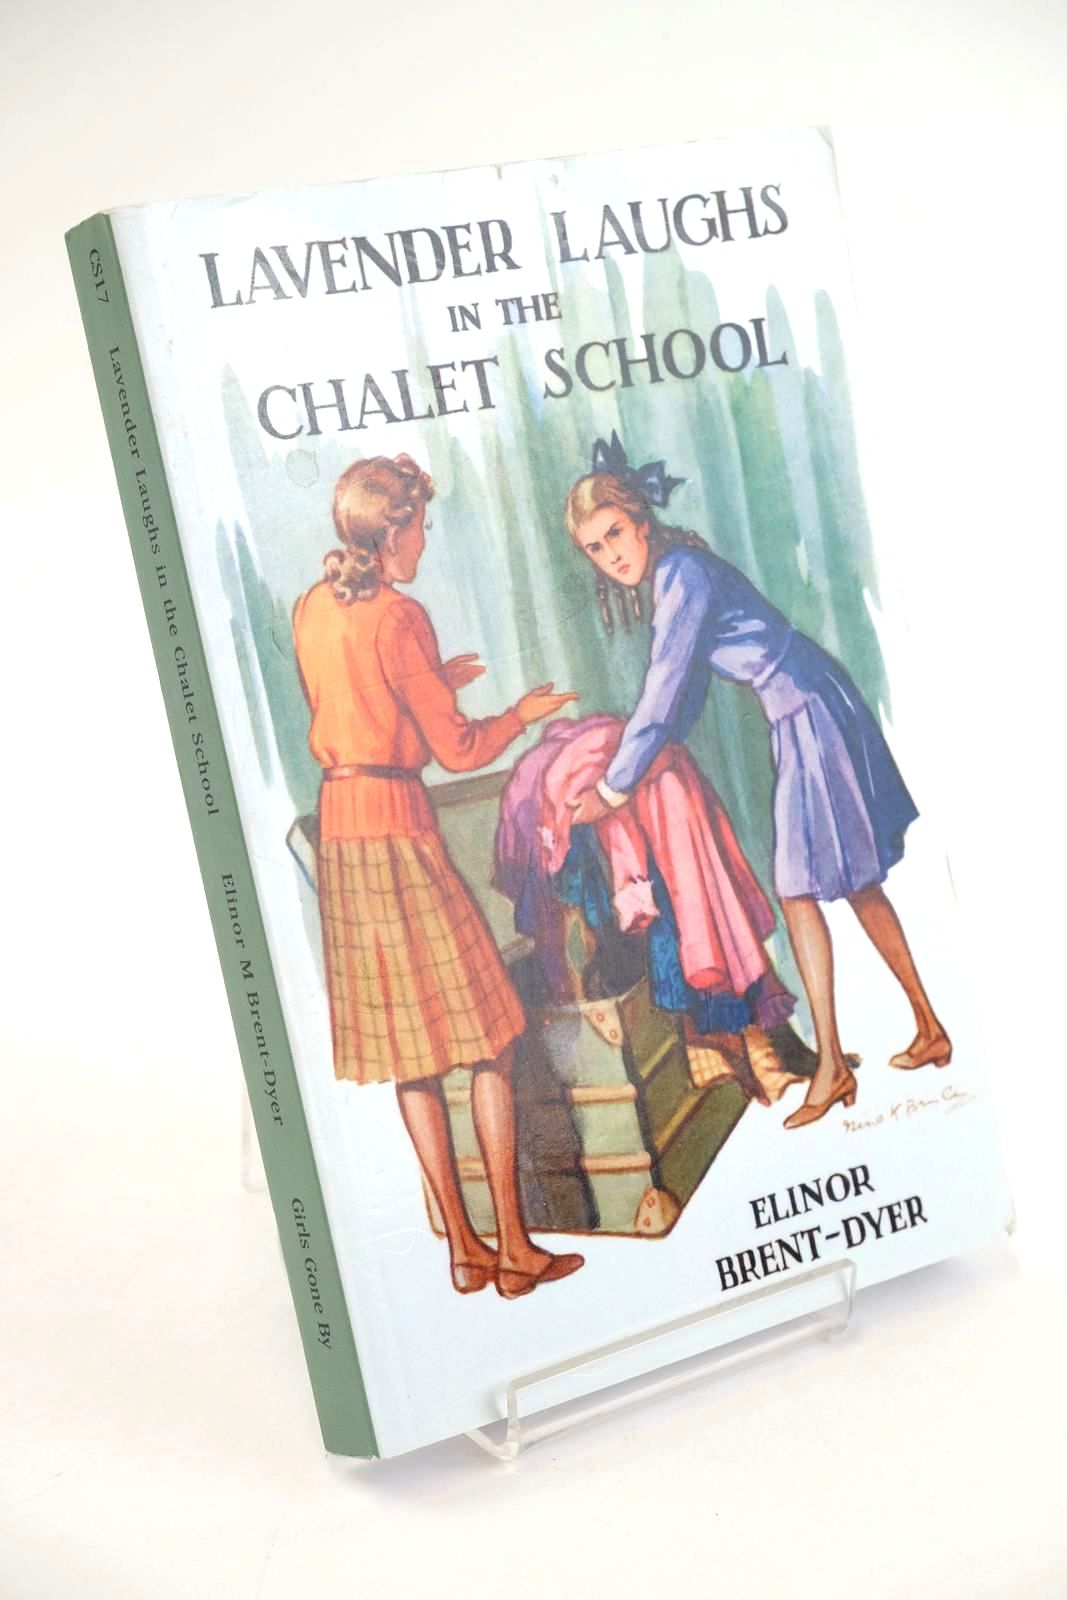 Photo of LAVENDER LAUGHS IN THE CHALET SCHOOL written by Brent-Dyer, Elinor M. published by Girls Gone By (STOCK CODE: 1323982)  for sale by Stella & Rose's Books